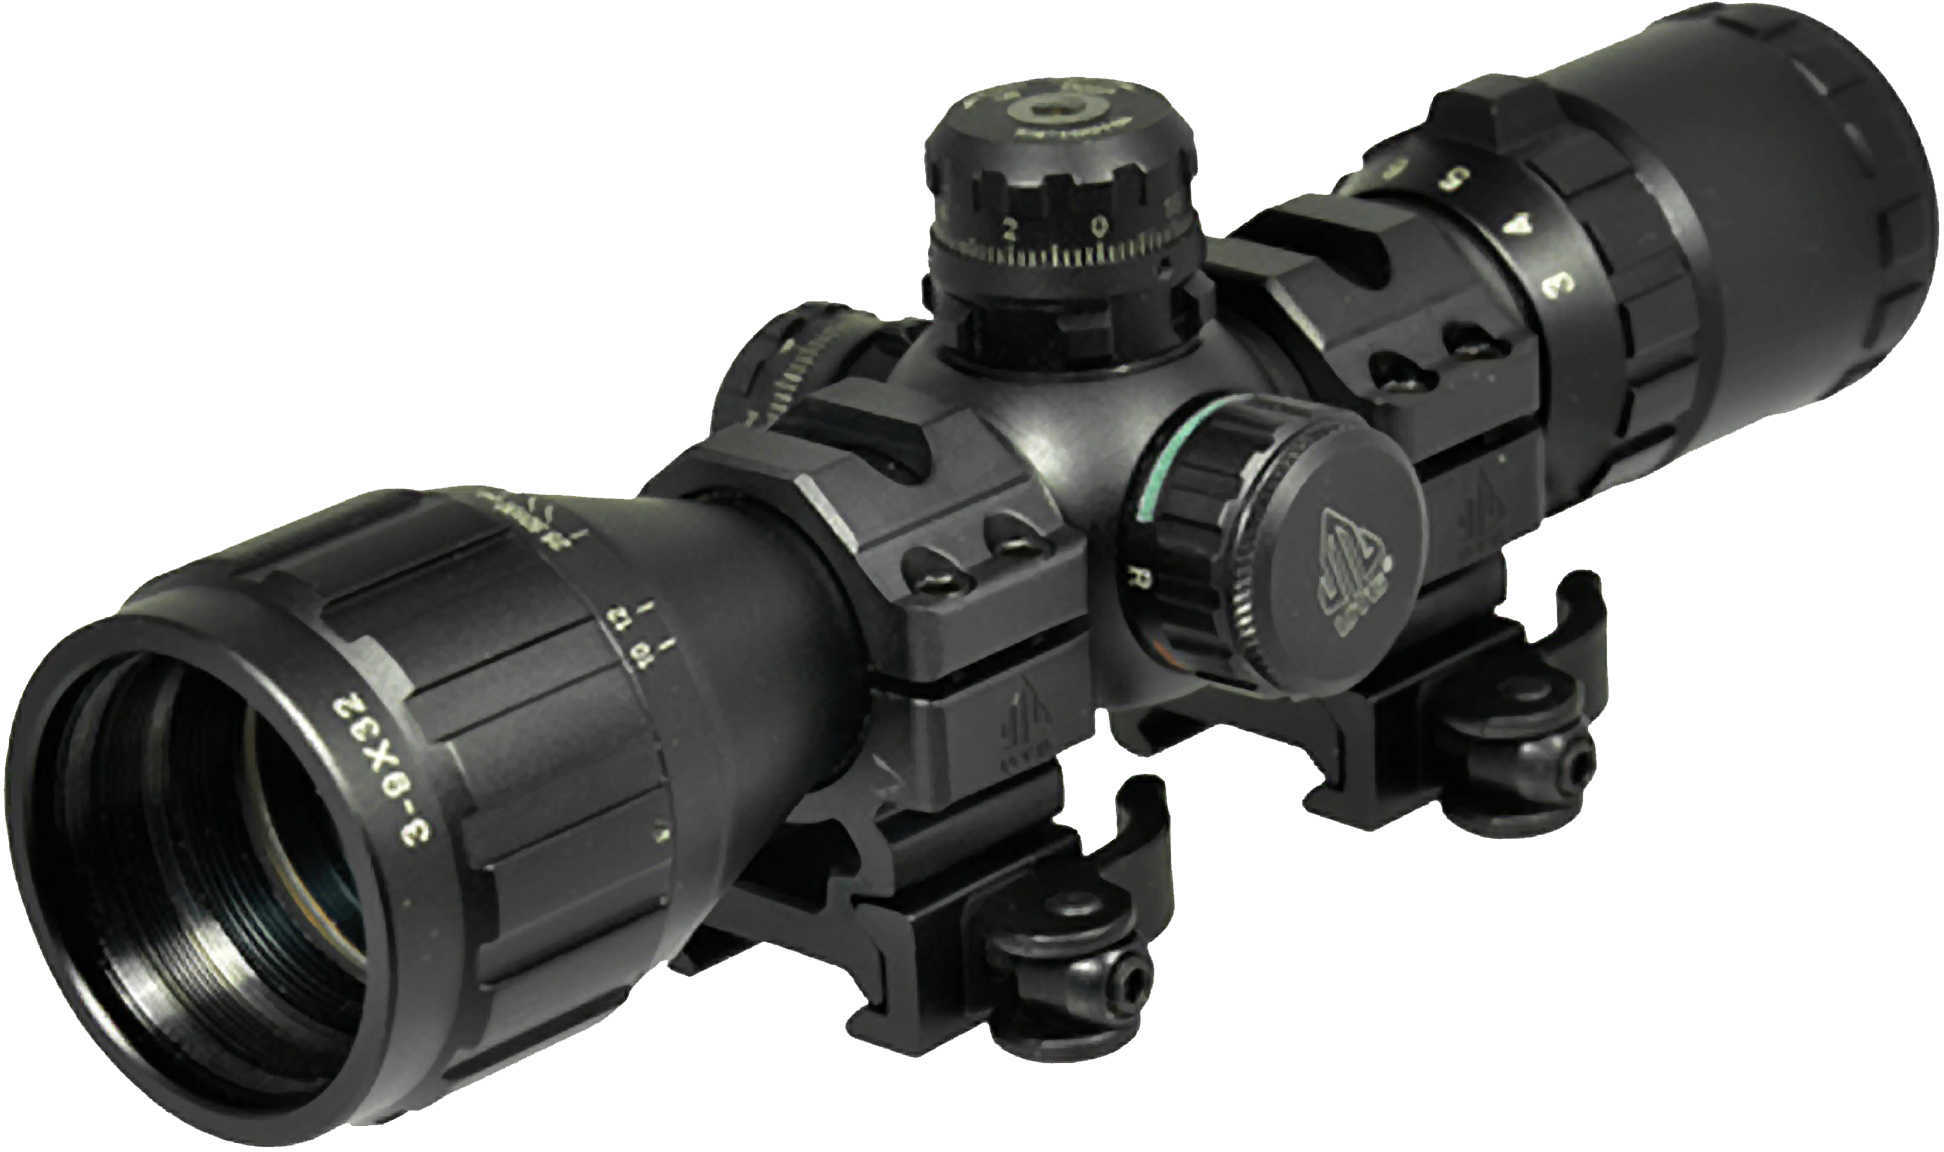 Leapers Inc. - UTG BugBuster Rifle Scope 3-9X 32 1" Red/Green Illuminated Mil-dot Reticle with Rings Black Finish SCP-M3